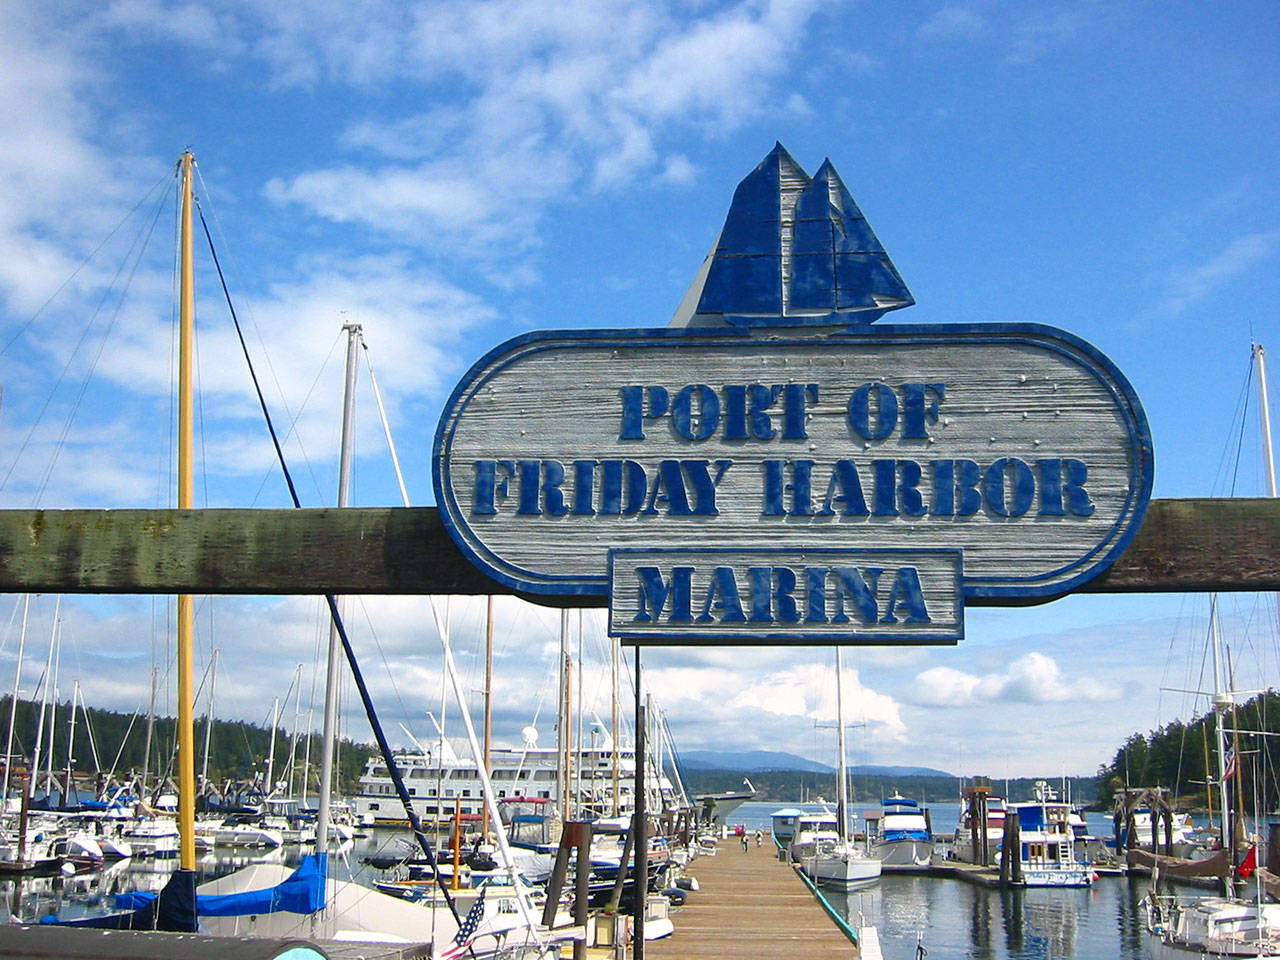 Port of Friday Harbor meeting